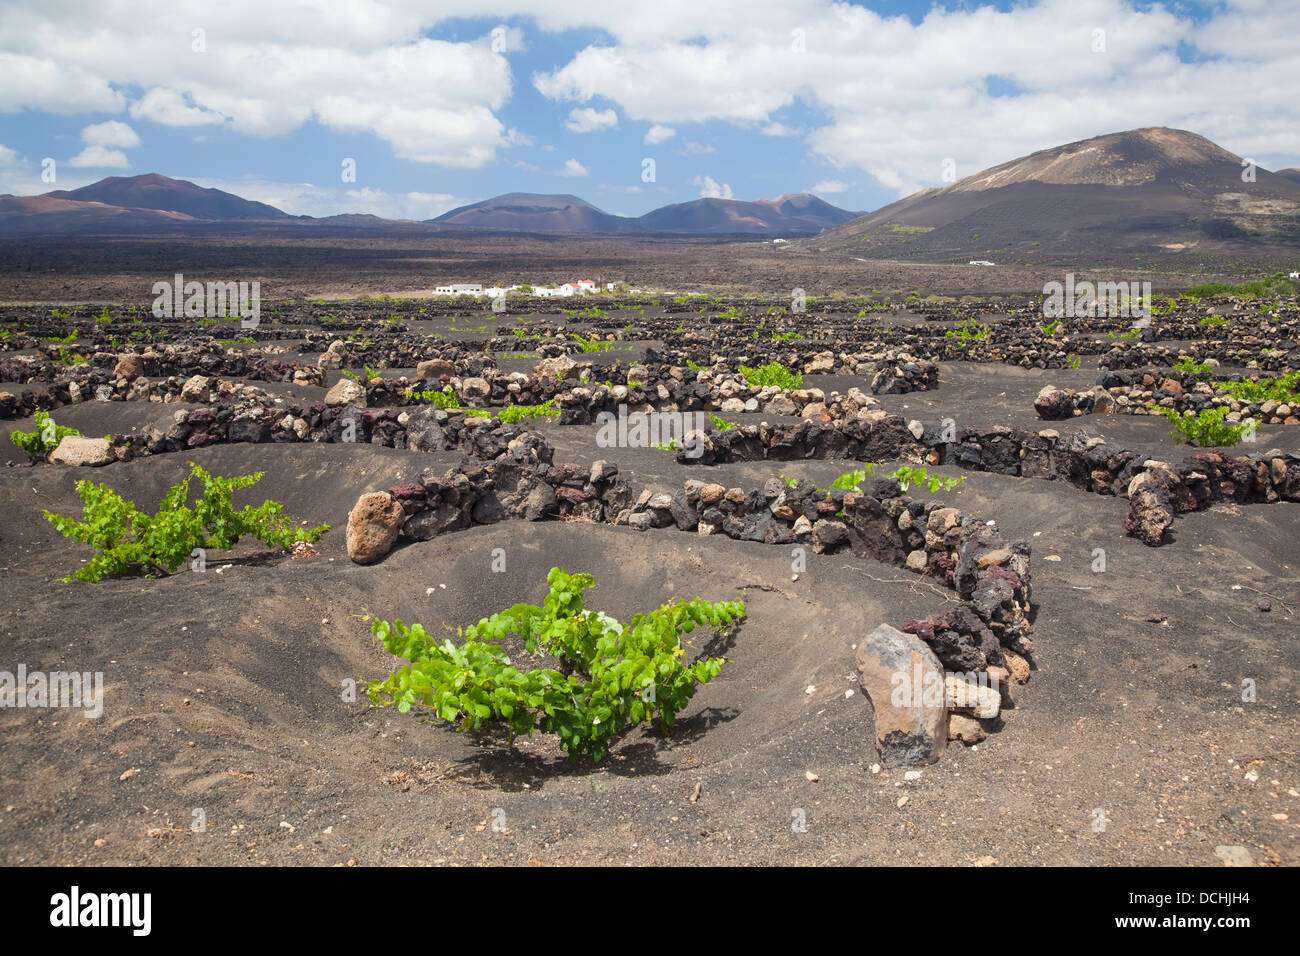 Vines growing in volcanic landscape of Lanzarote.  The low, curved walls are traditionally used to protect the vines from the wind. Stock Photo